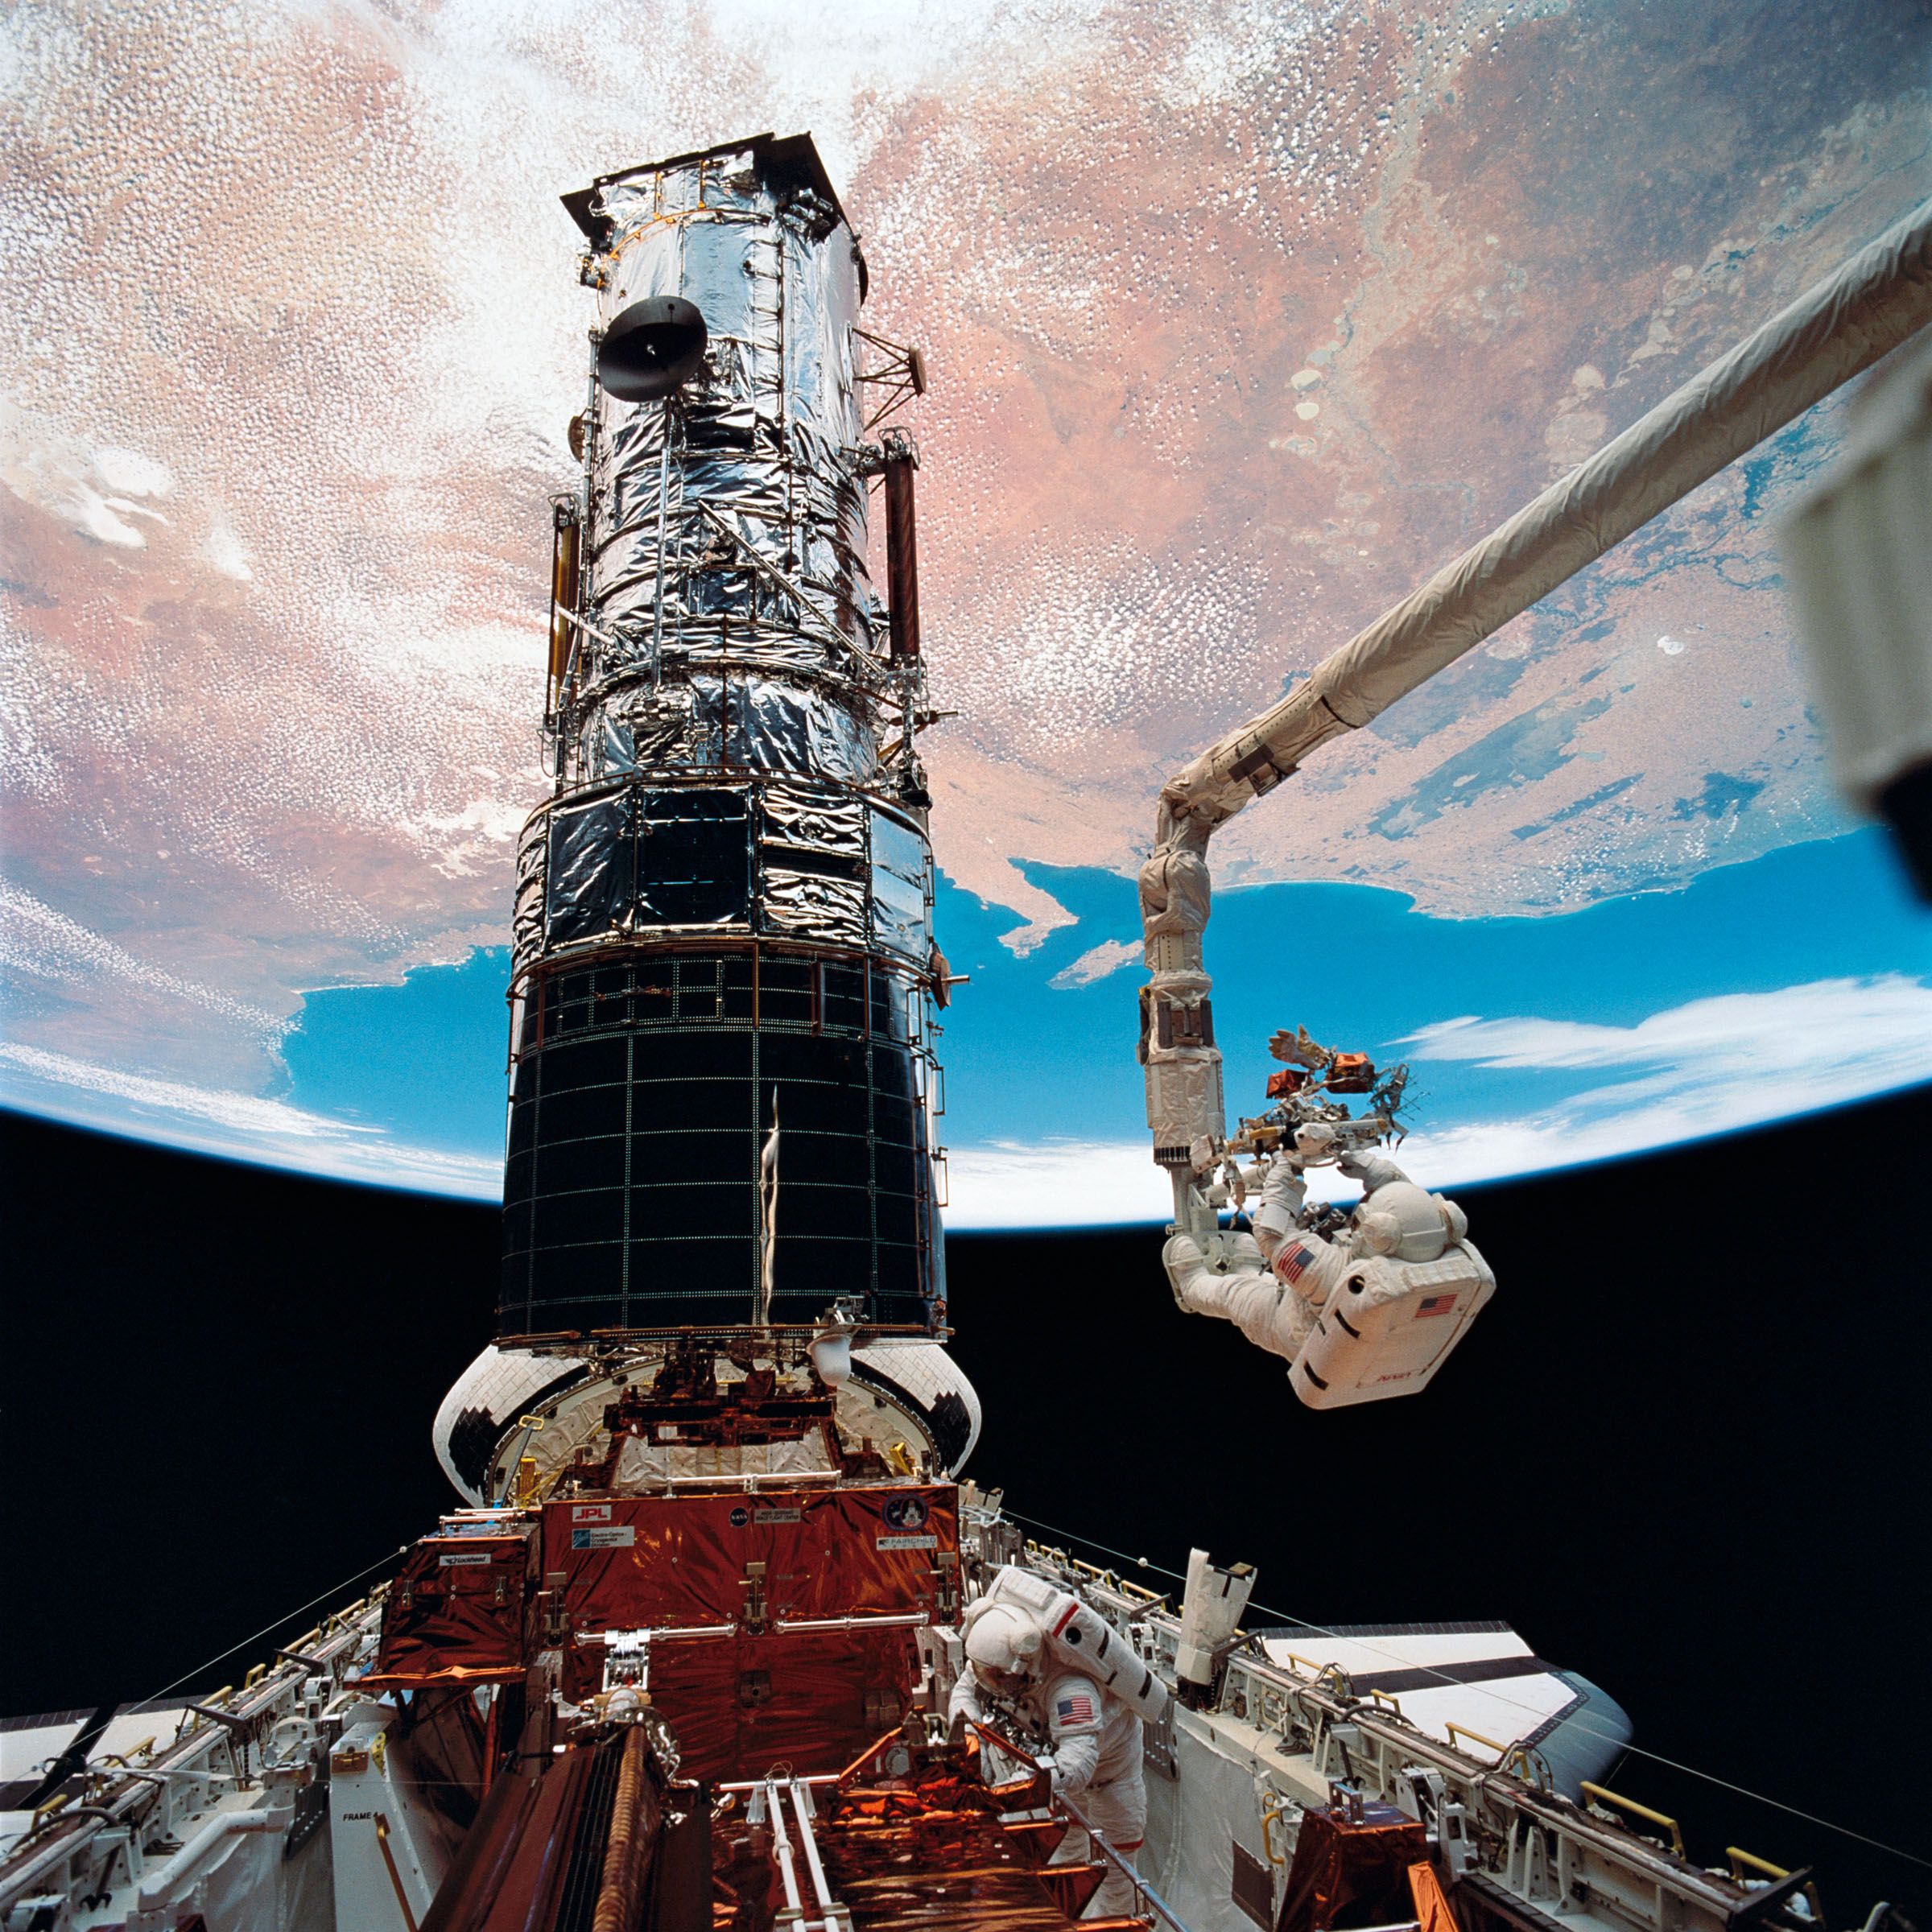 Earth is visible in the background as an astronaut attached to the shuttle's robotic arm is moved toward the top of the Hubble telescope. Another astronaut works in the shuttle bay below.